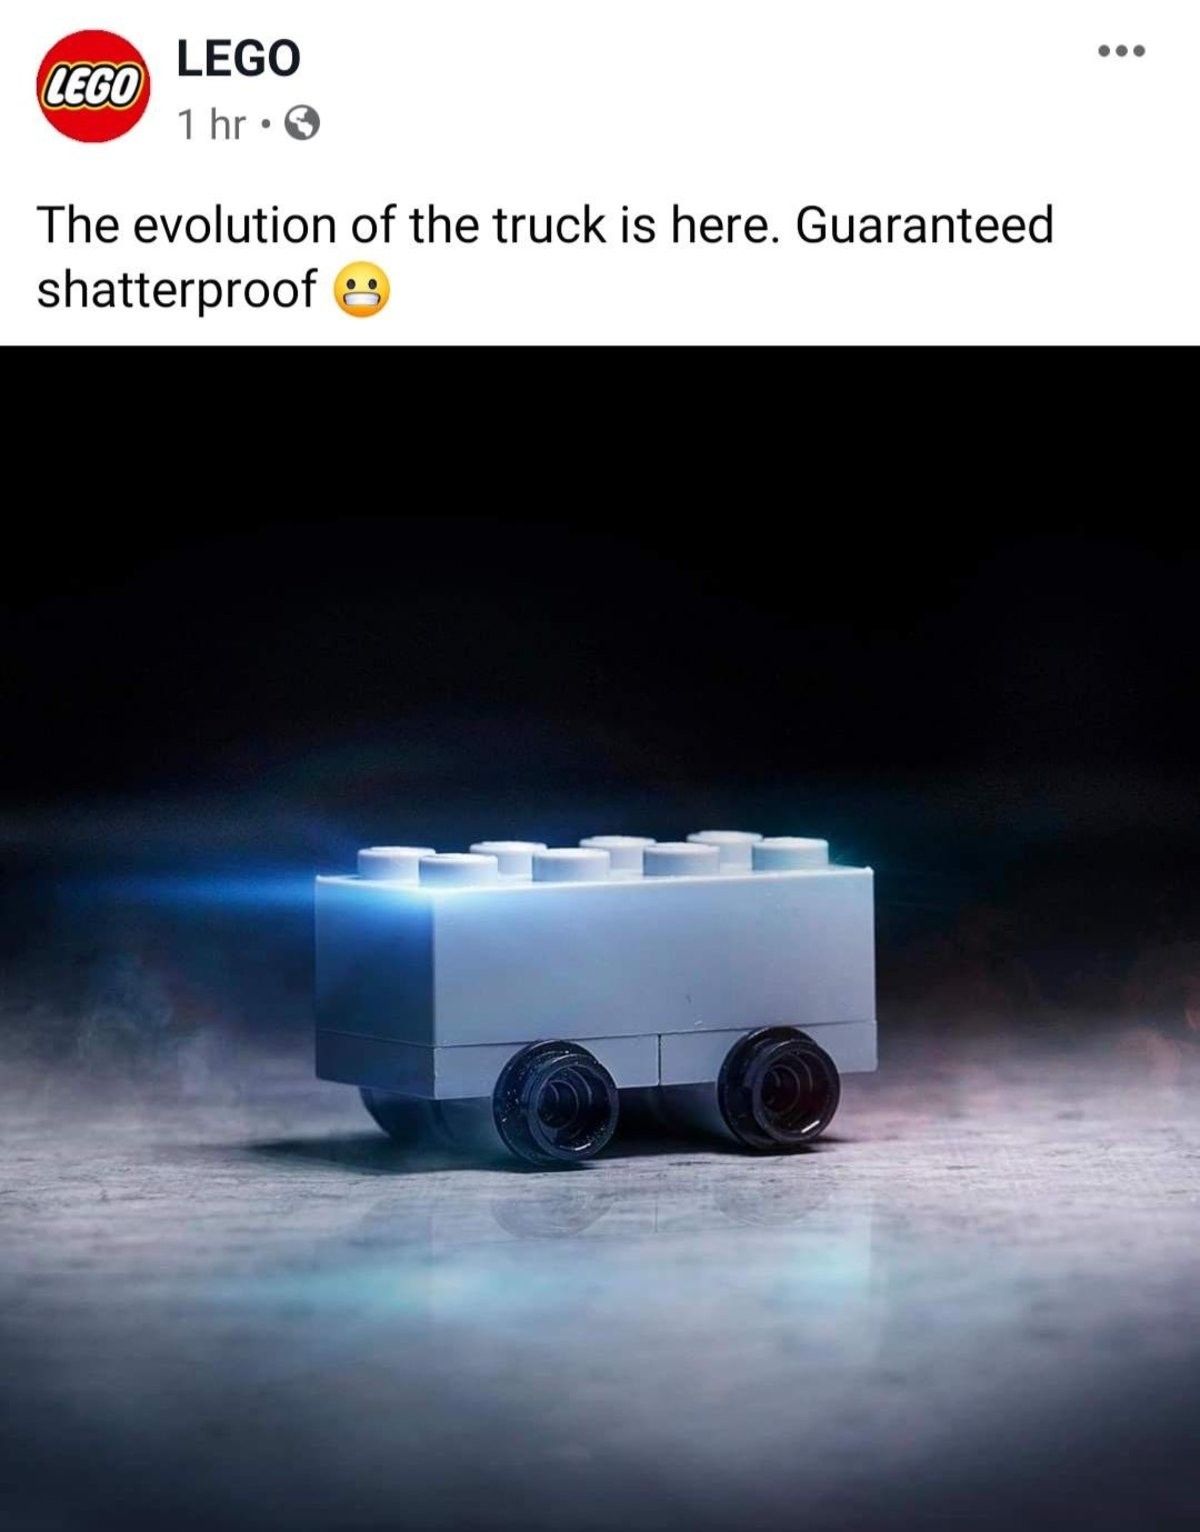 The Tesla truck is to stop the giants